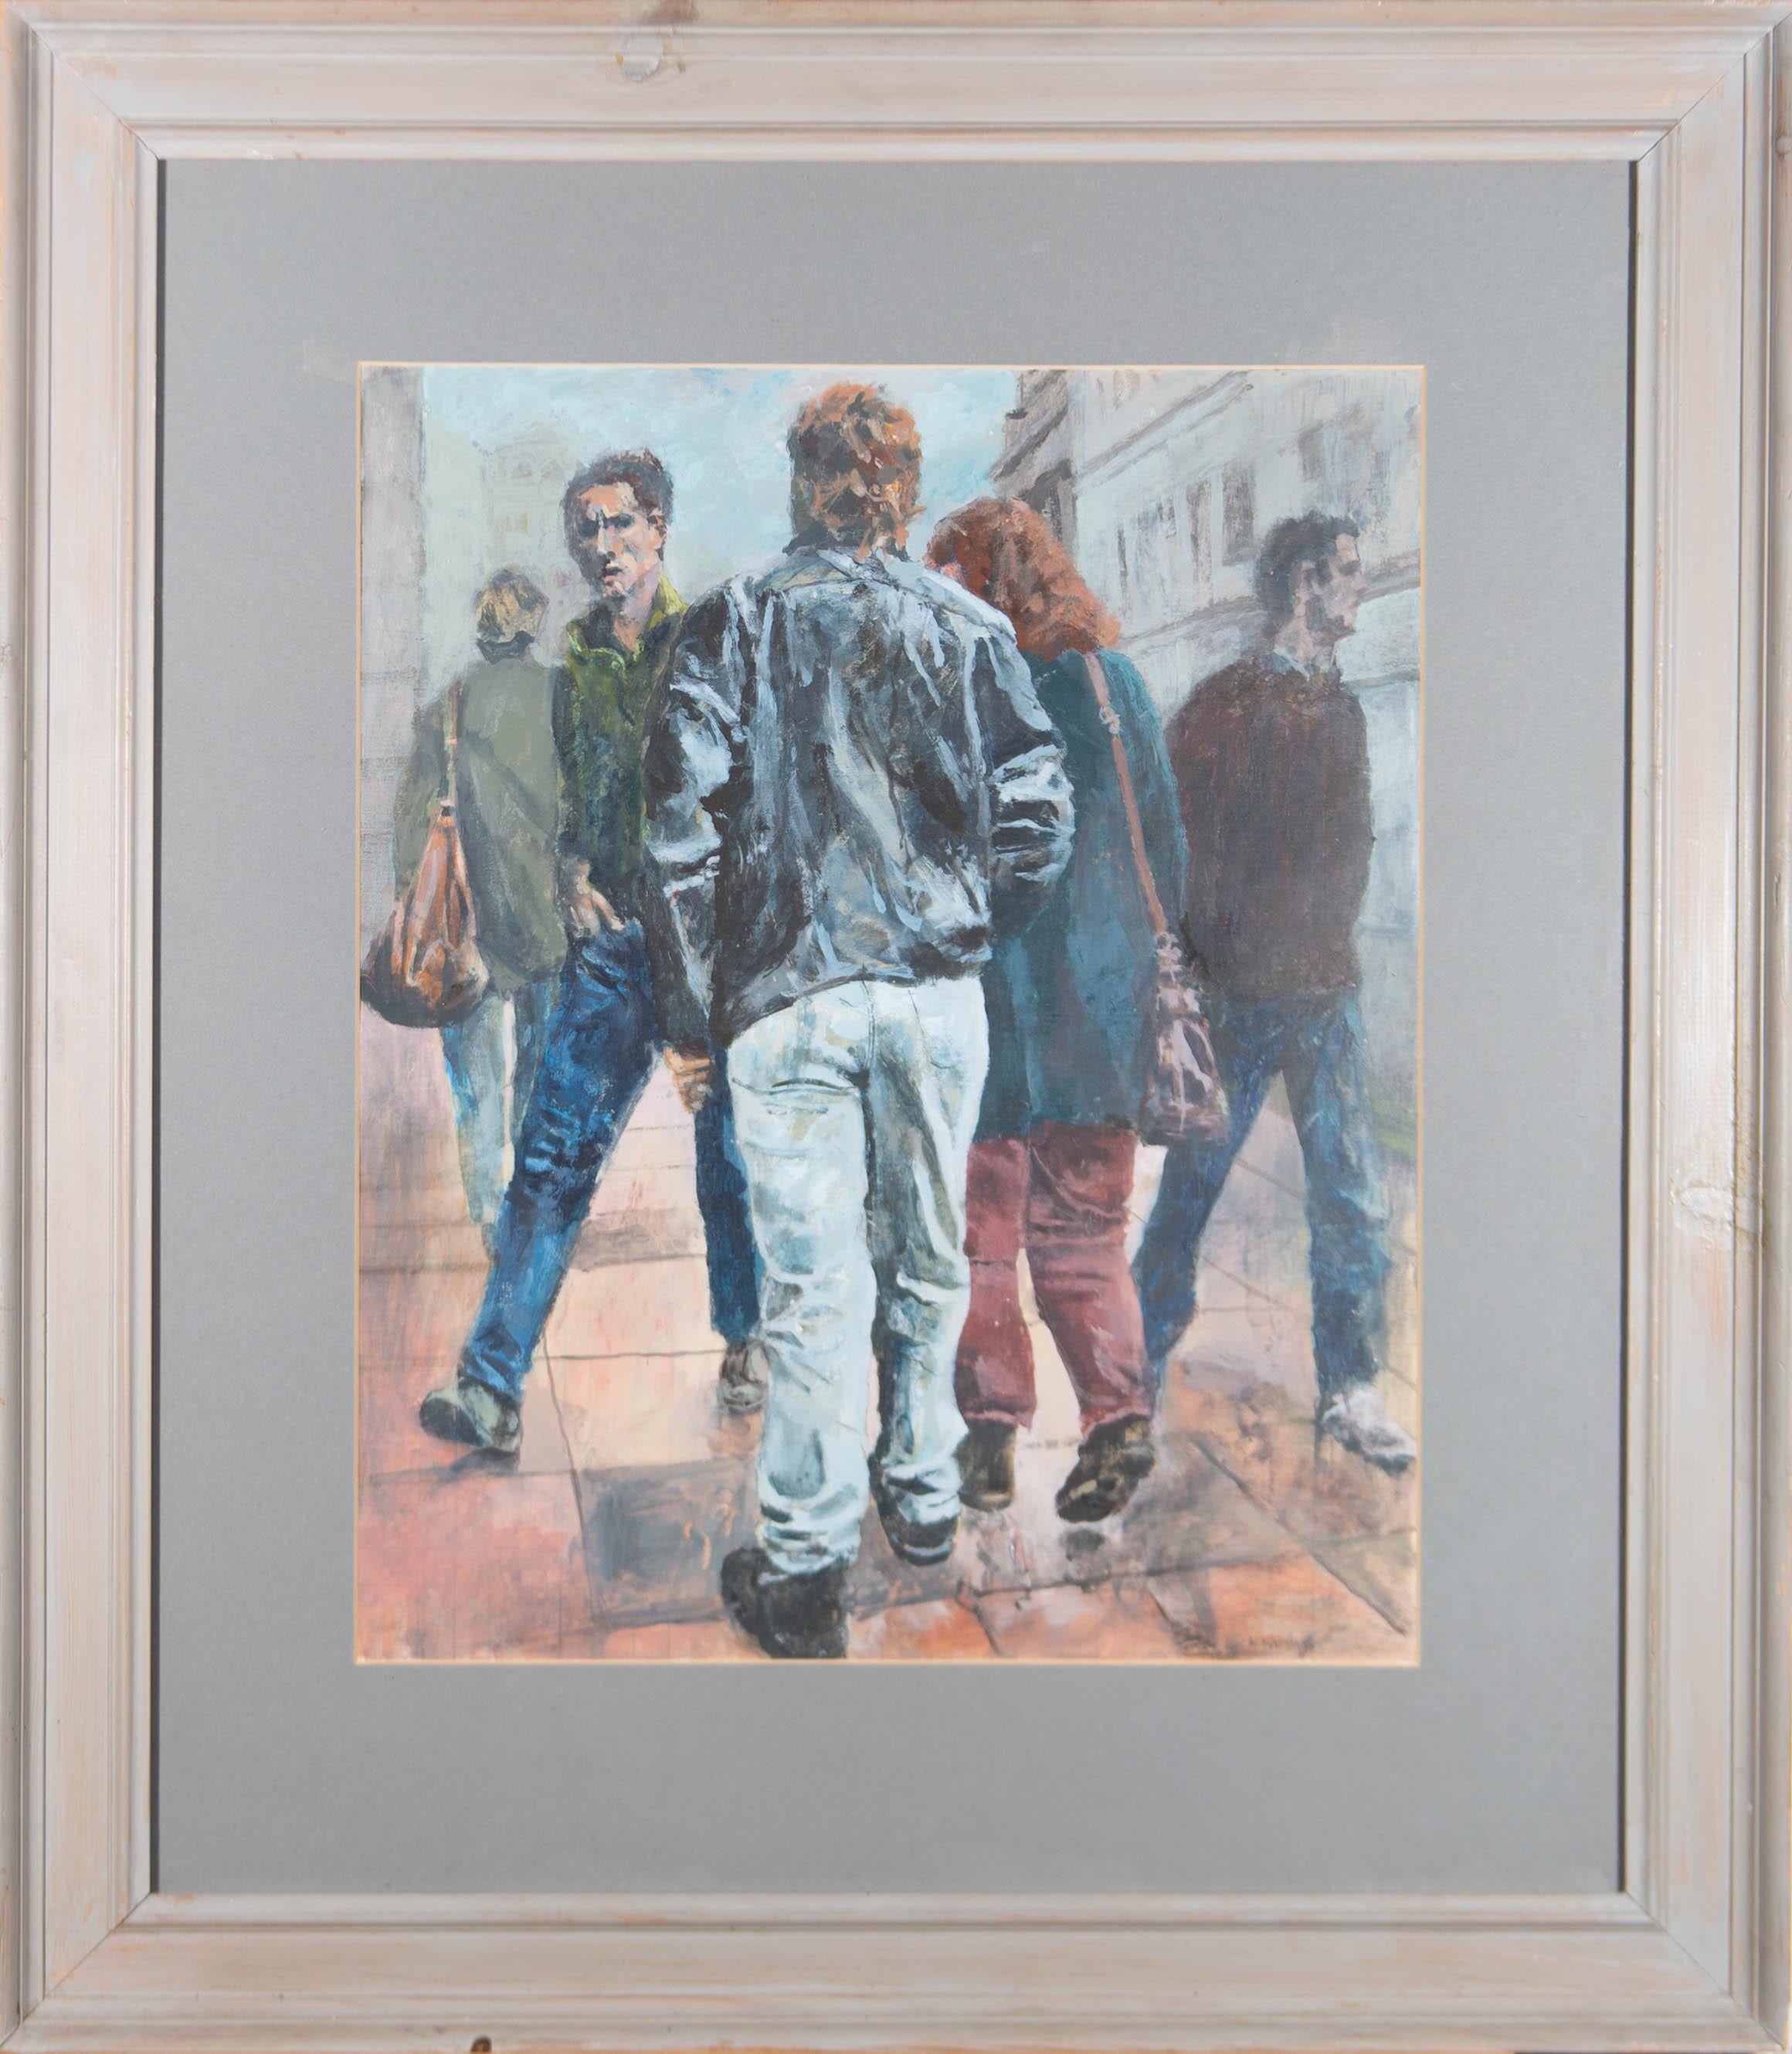 A fine contemporary painting perfectly capturing a bustling city street. Signed and dated. On the reverse is a label from the Bankside Gallery. Well presented in a painted wood frame with glazing and a blue mount board.

On Canvasboard.